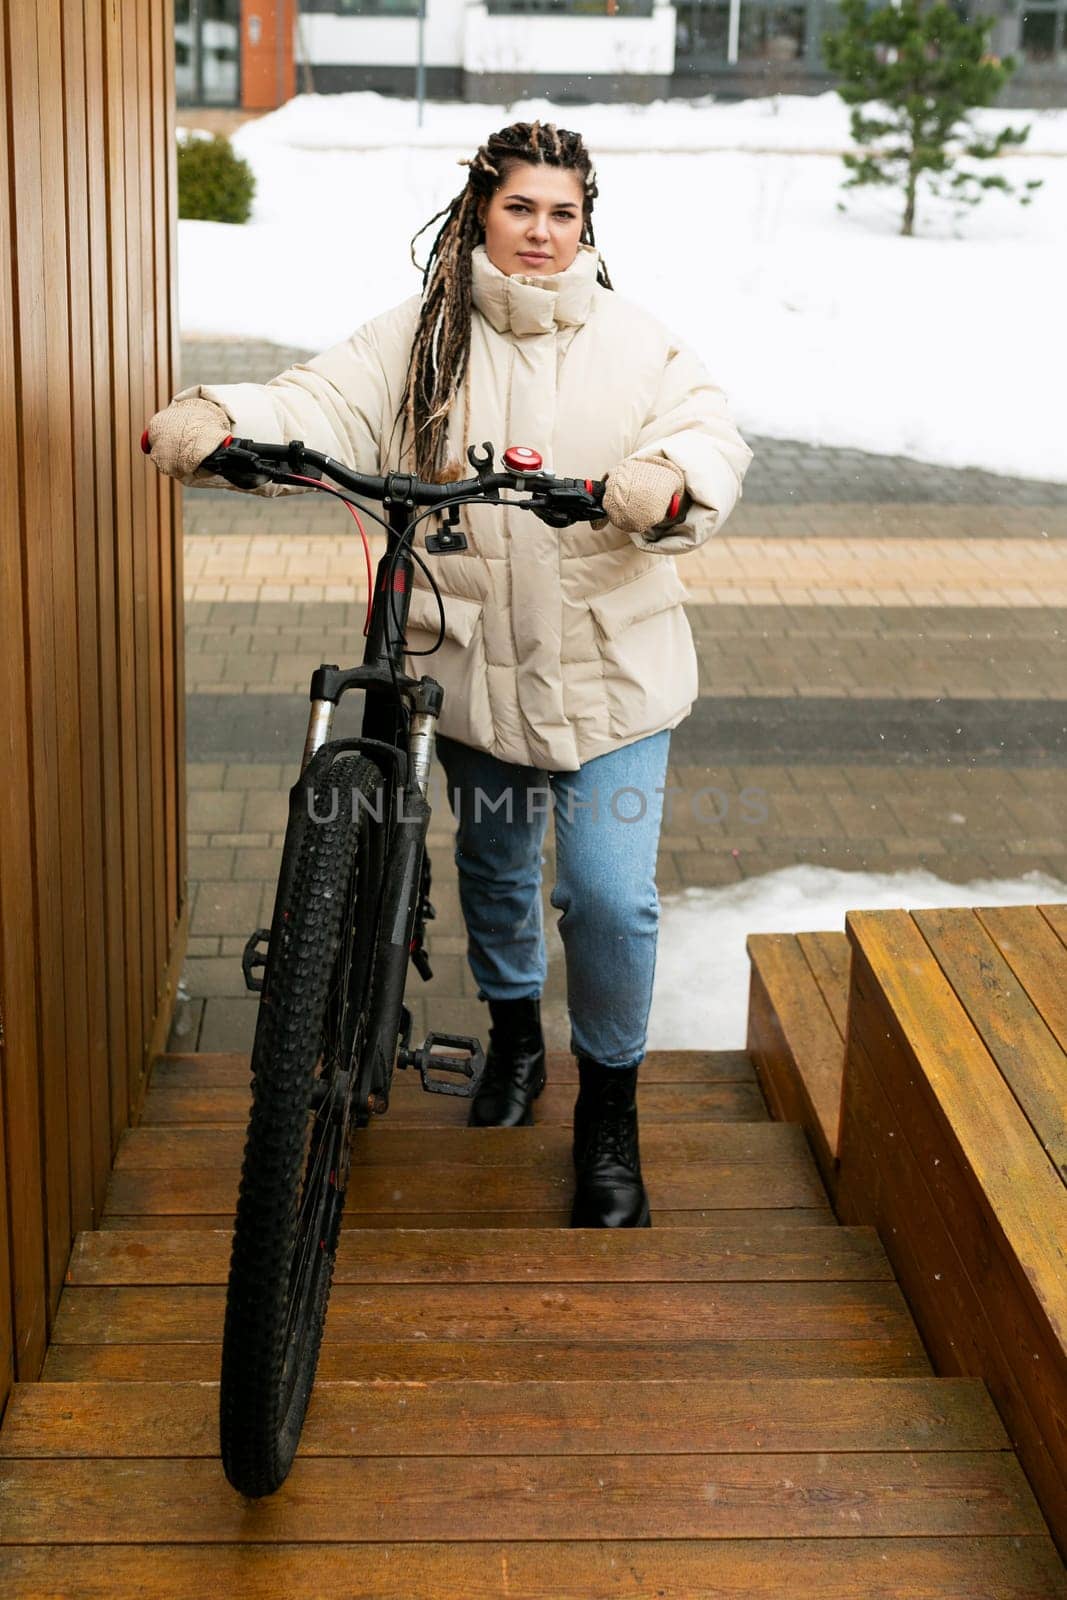 A woman with dreadlocks is carefully navigating a bike down a flight of stairs. She is holding onto the handlebars and balancing the bike as she descends each step. Her focused expression shows determination in safely completing this unconventional task.